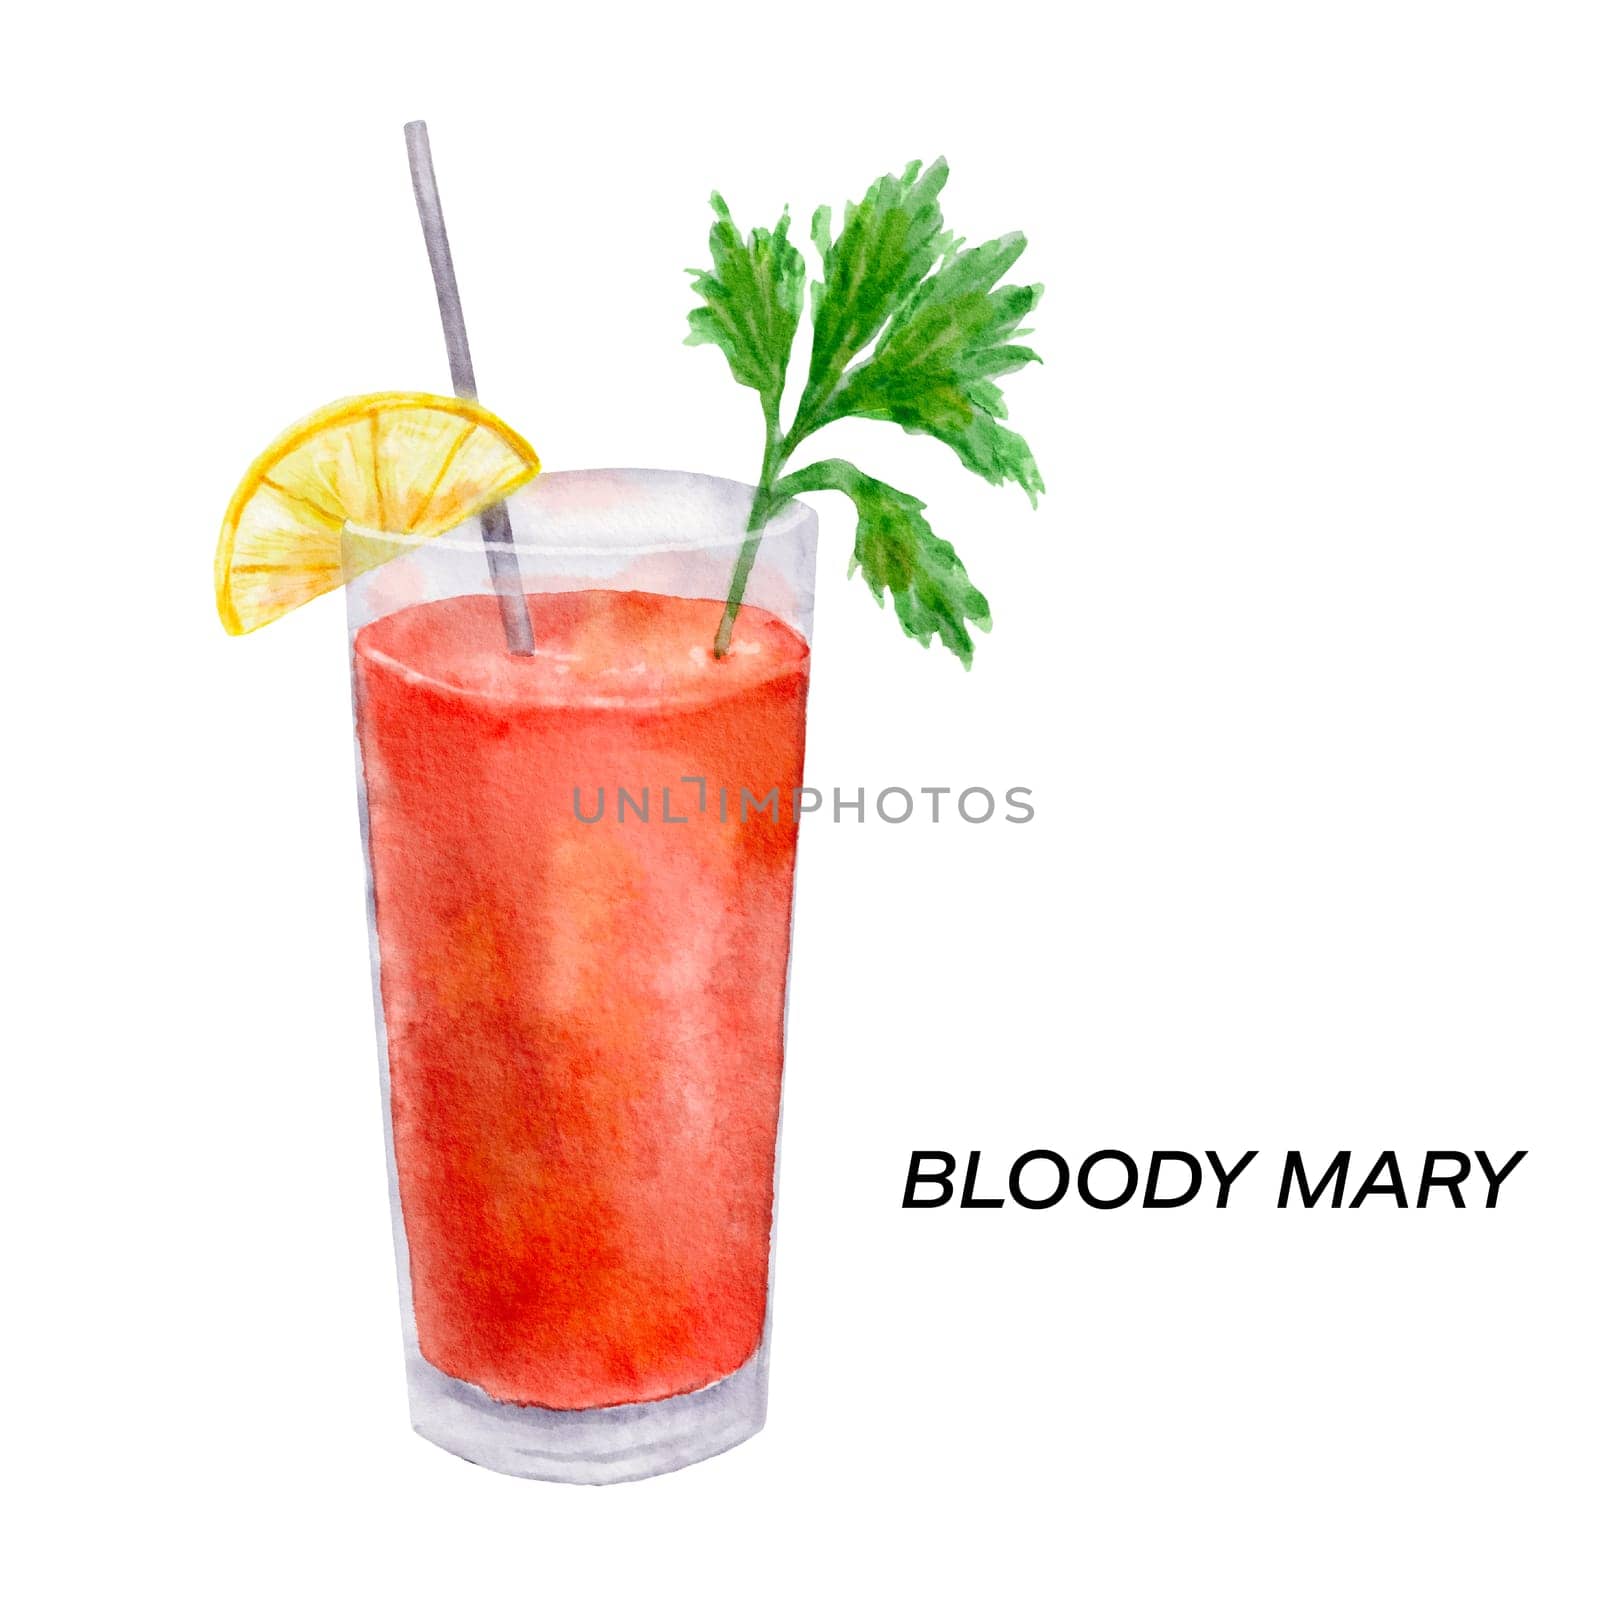 Bloody mary cocktail. Watercolor illustration of drink in glass isolated on white by ElenaPlatova